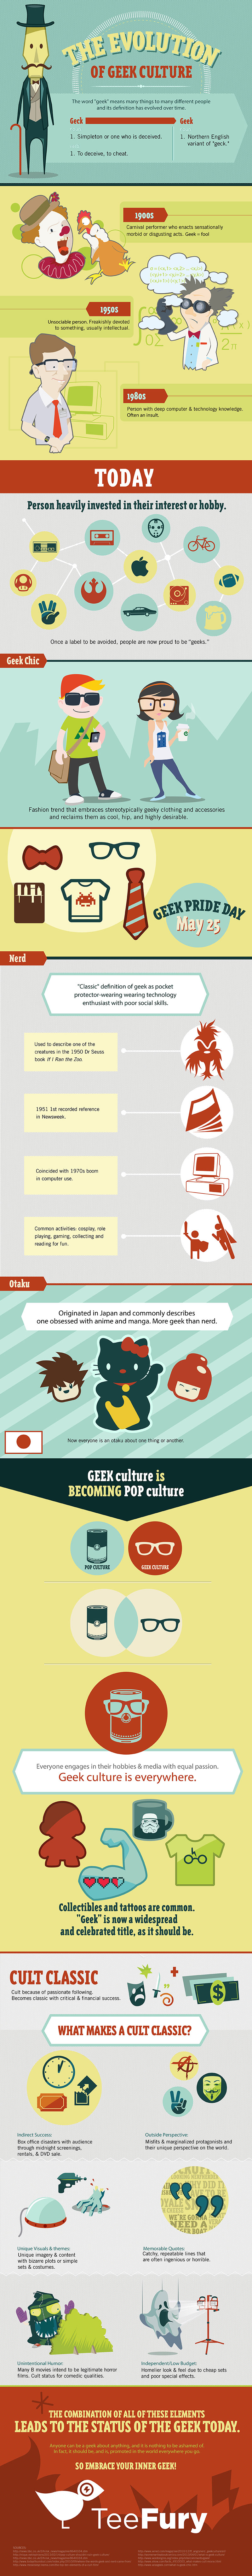 The Evolution of Geek Culture Infographic